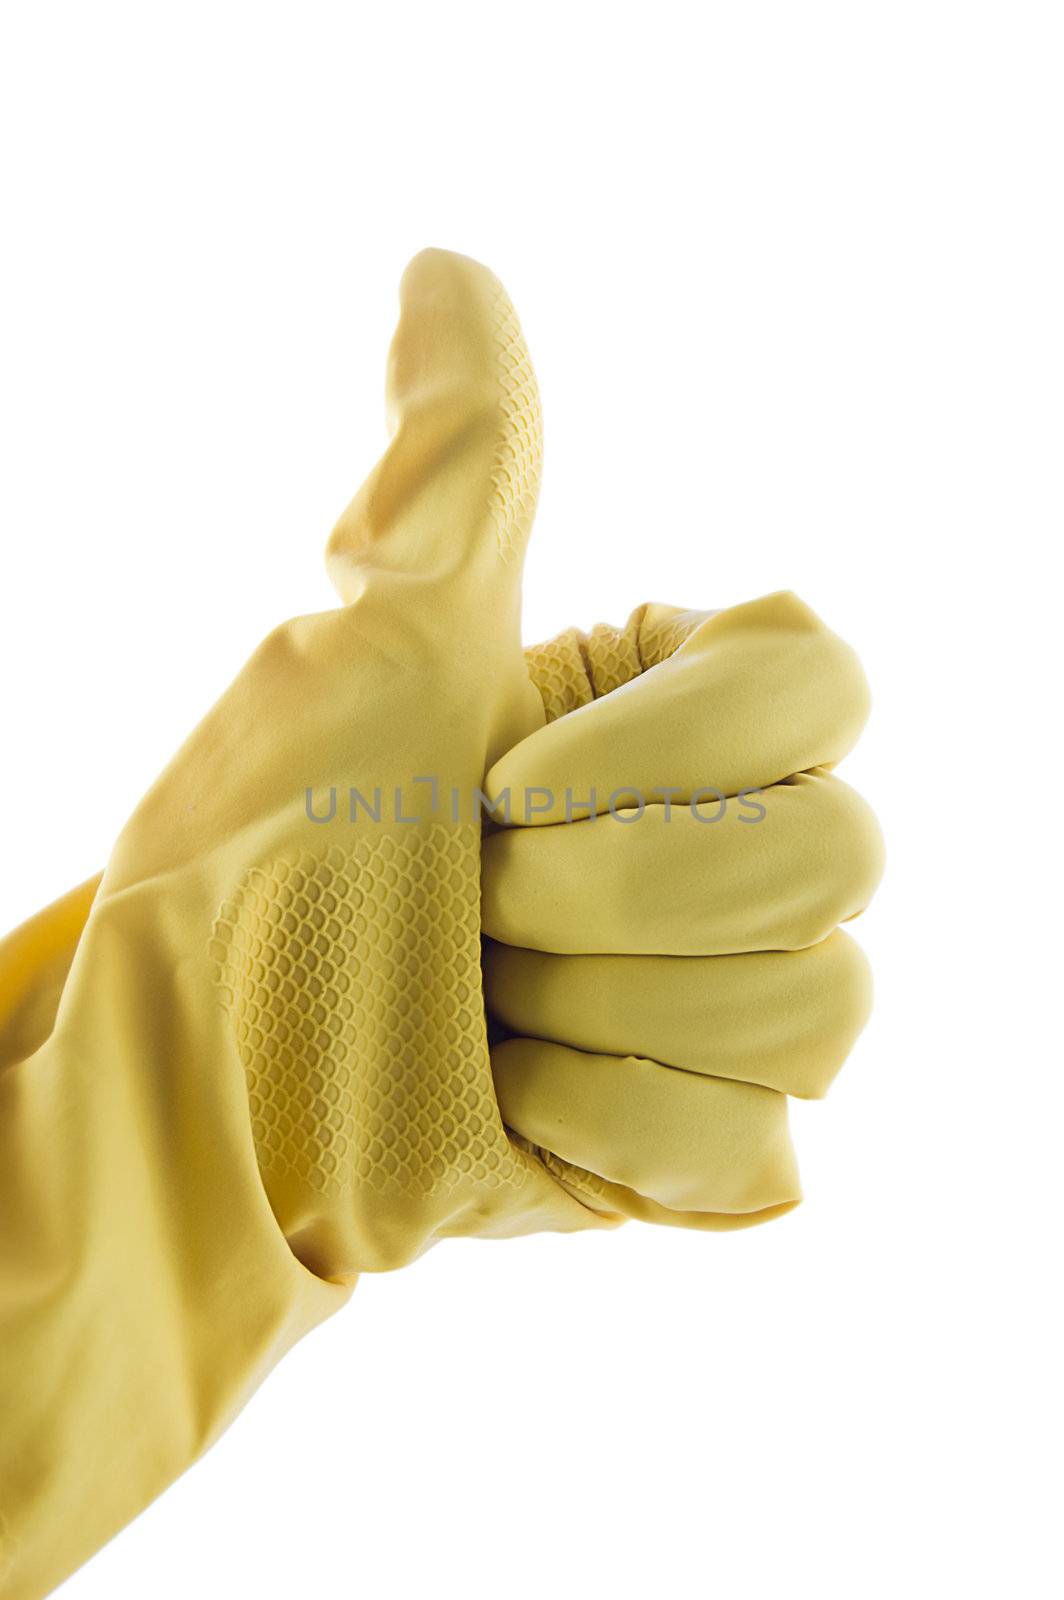 Thumb up in yellow working glove on white